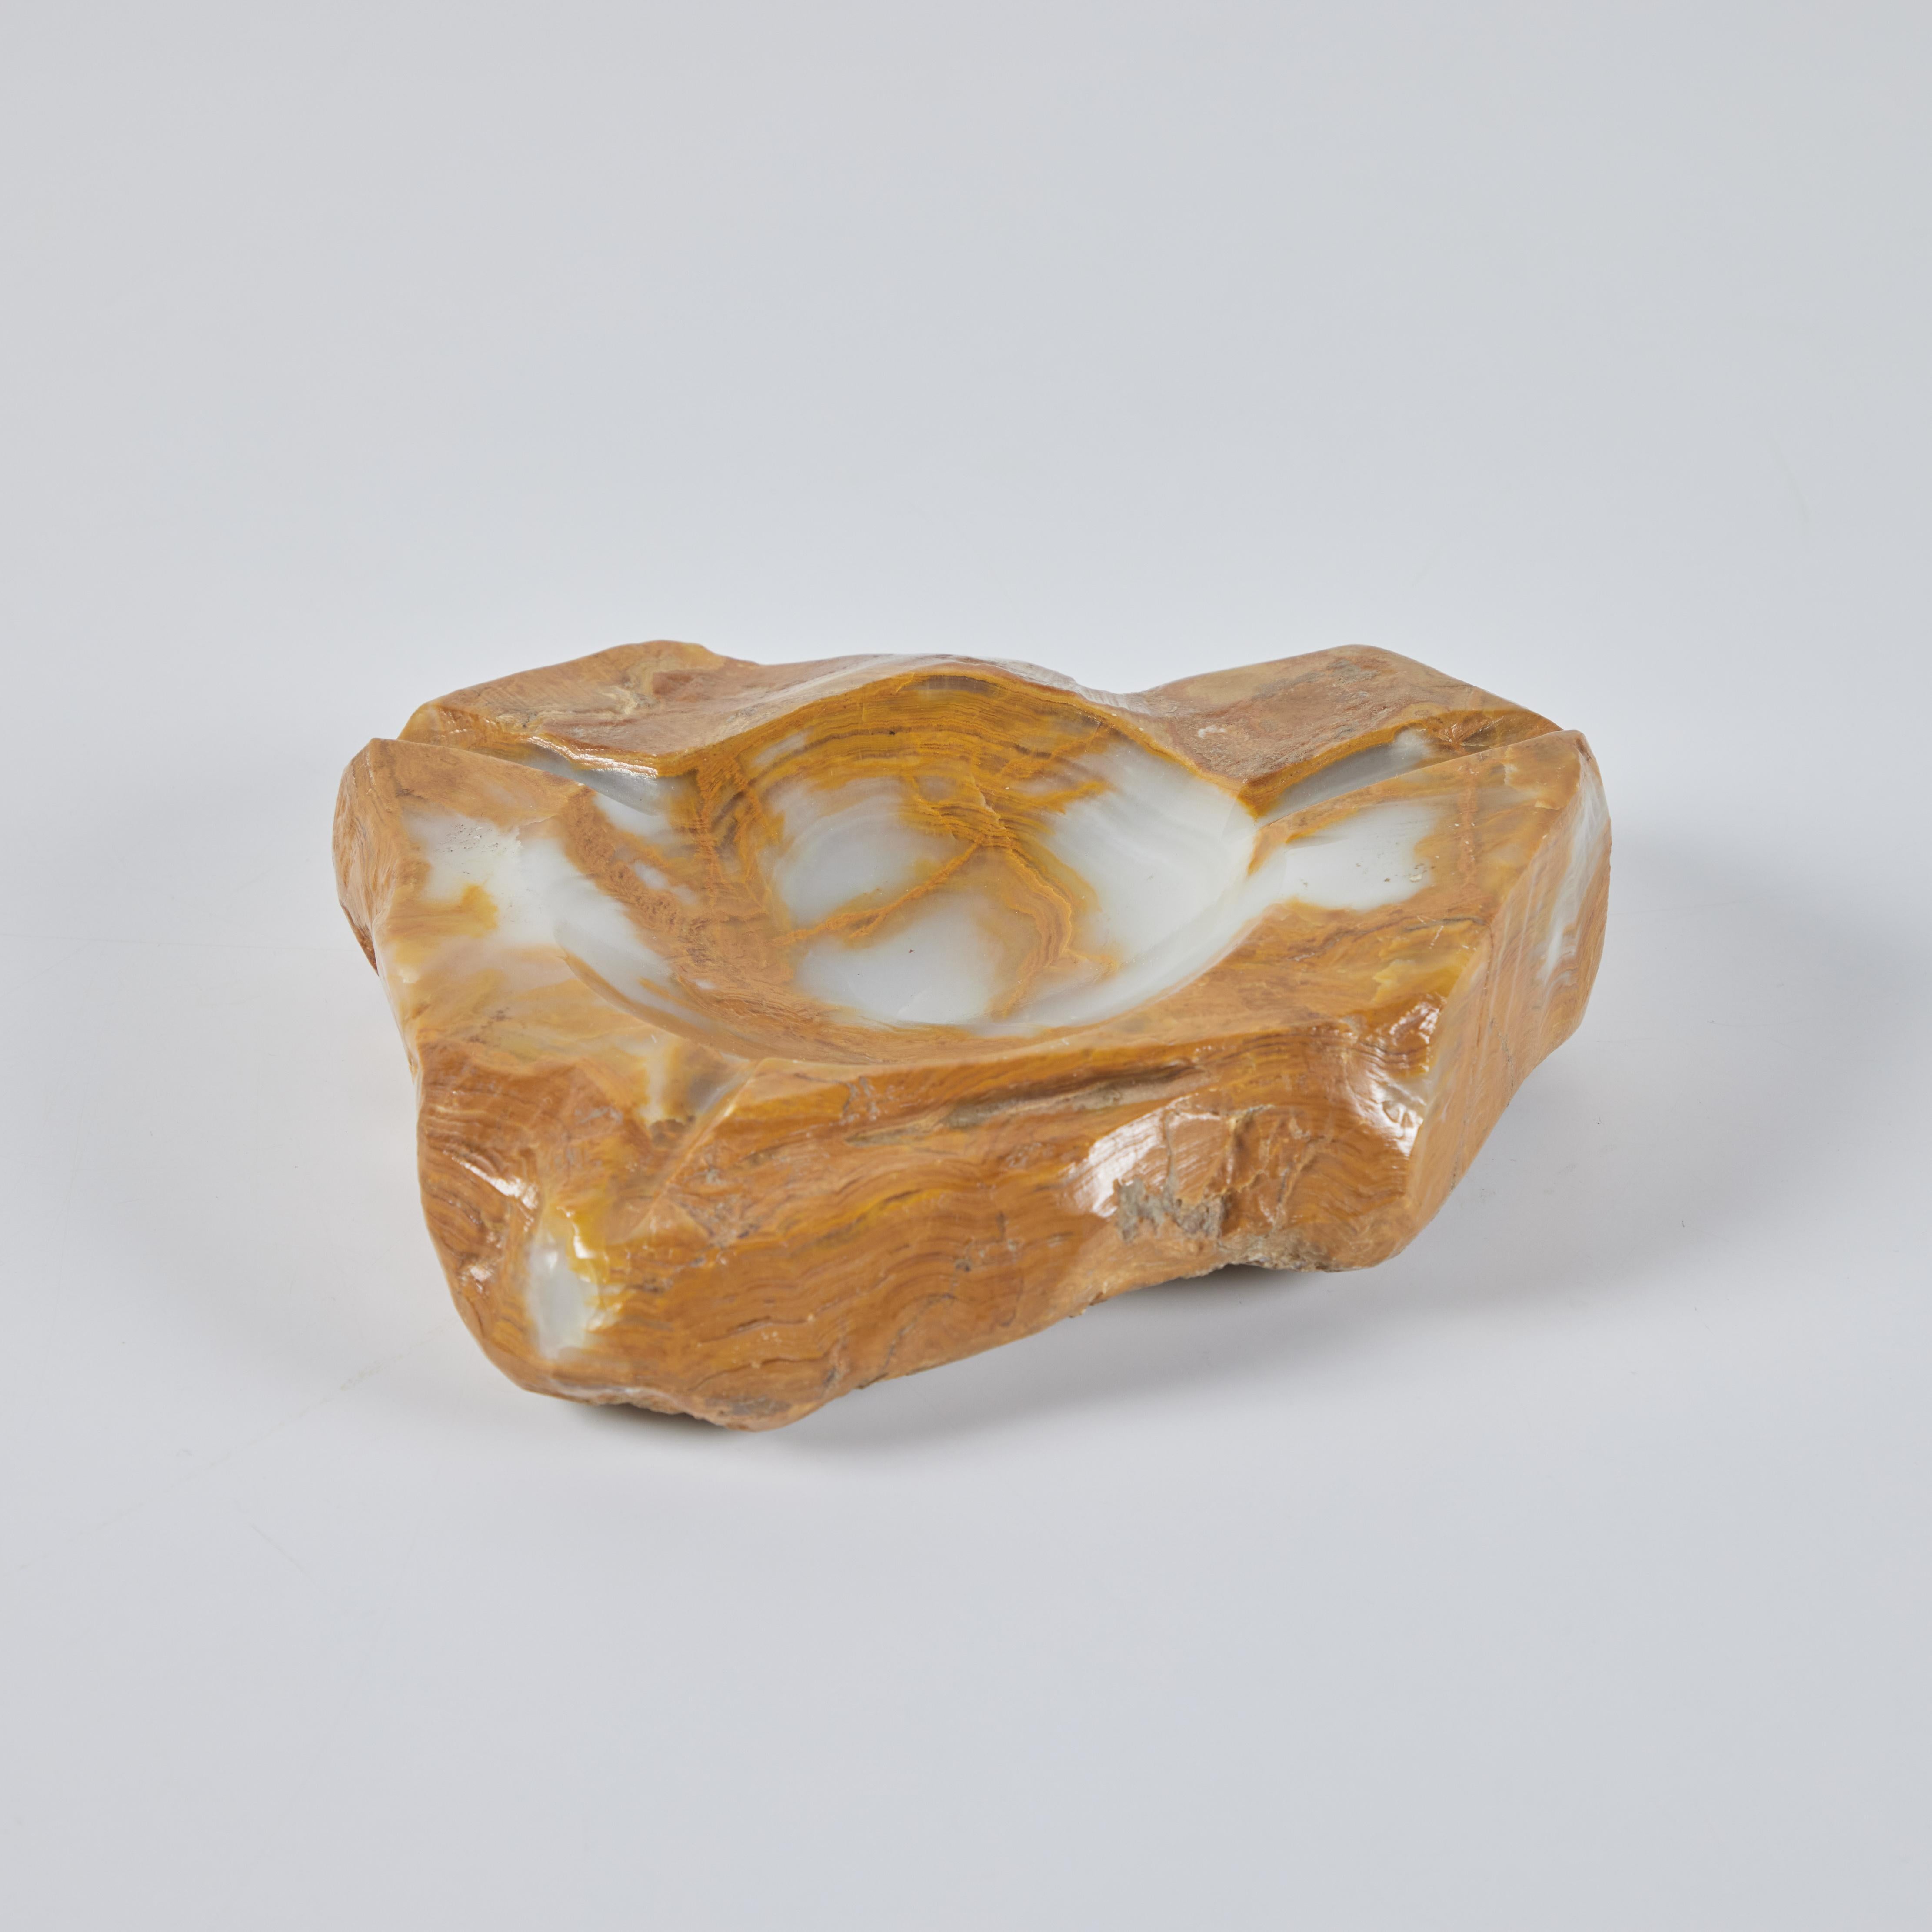 Hand carved polished onyx ashtray features a beautiful golden and cream coloring with a raw edge. The center of the tray has a round dish with three grooves coming off the center. Though initially used as an ashtray, it can serve as a vide poche or